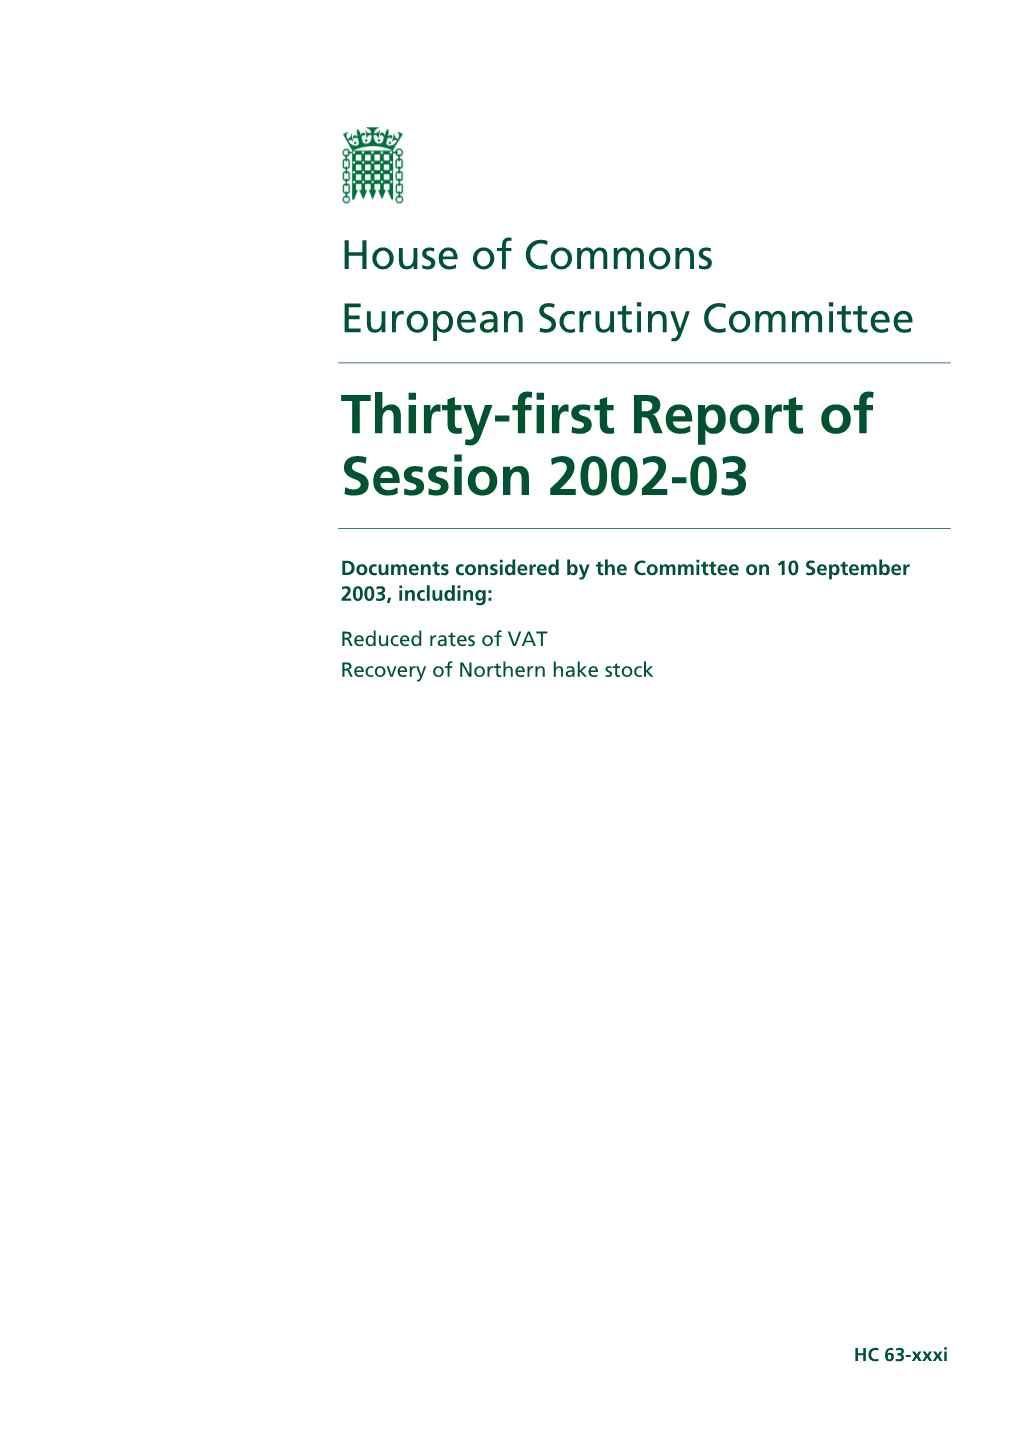 Thirty-First Report of Session 2002-03